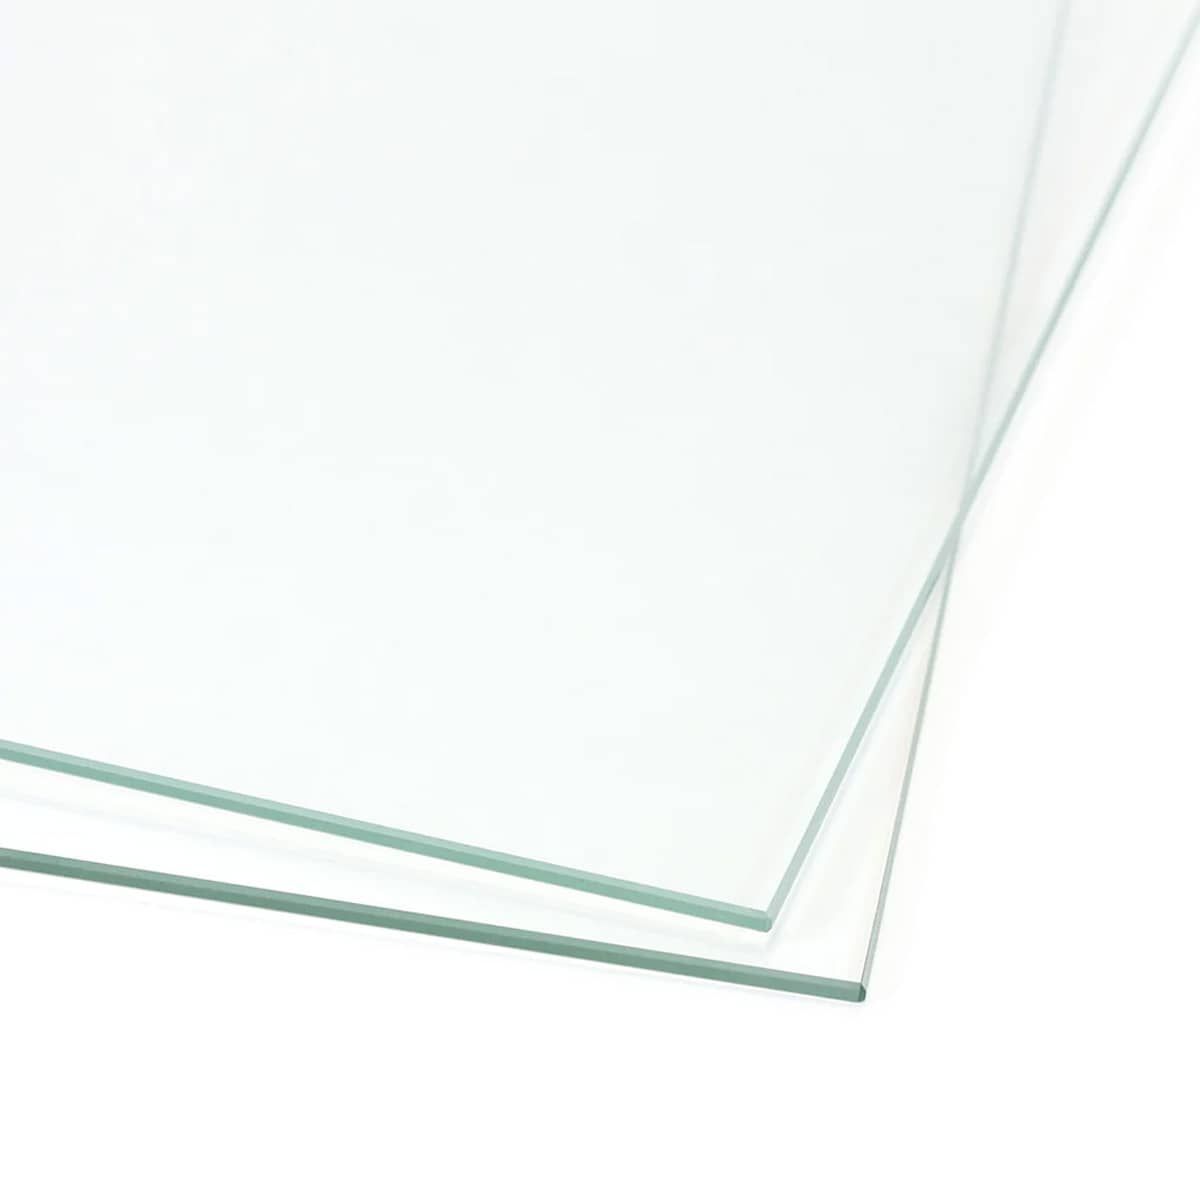 Two sizes of glass palettes available